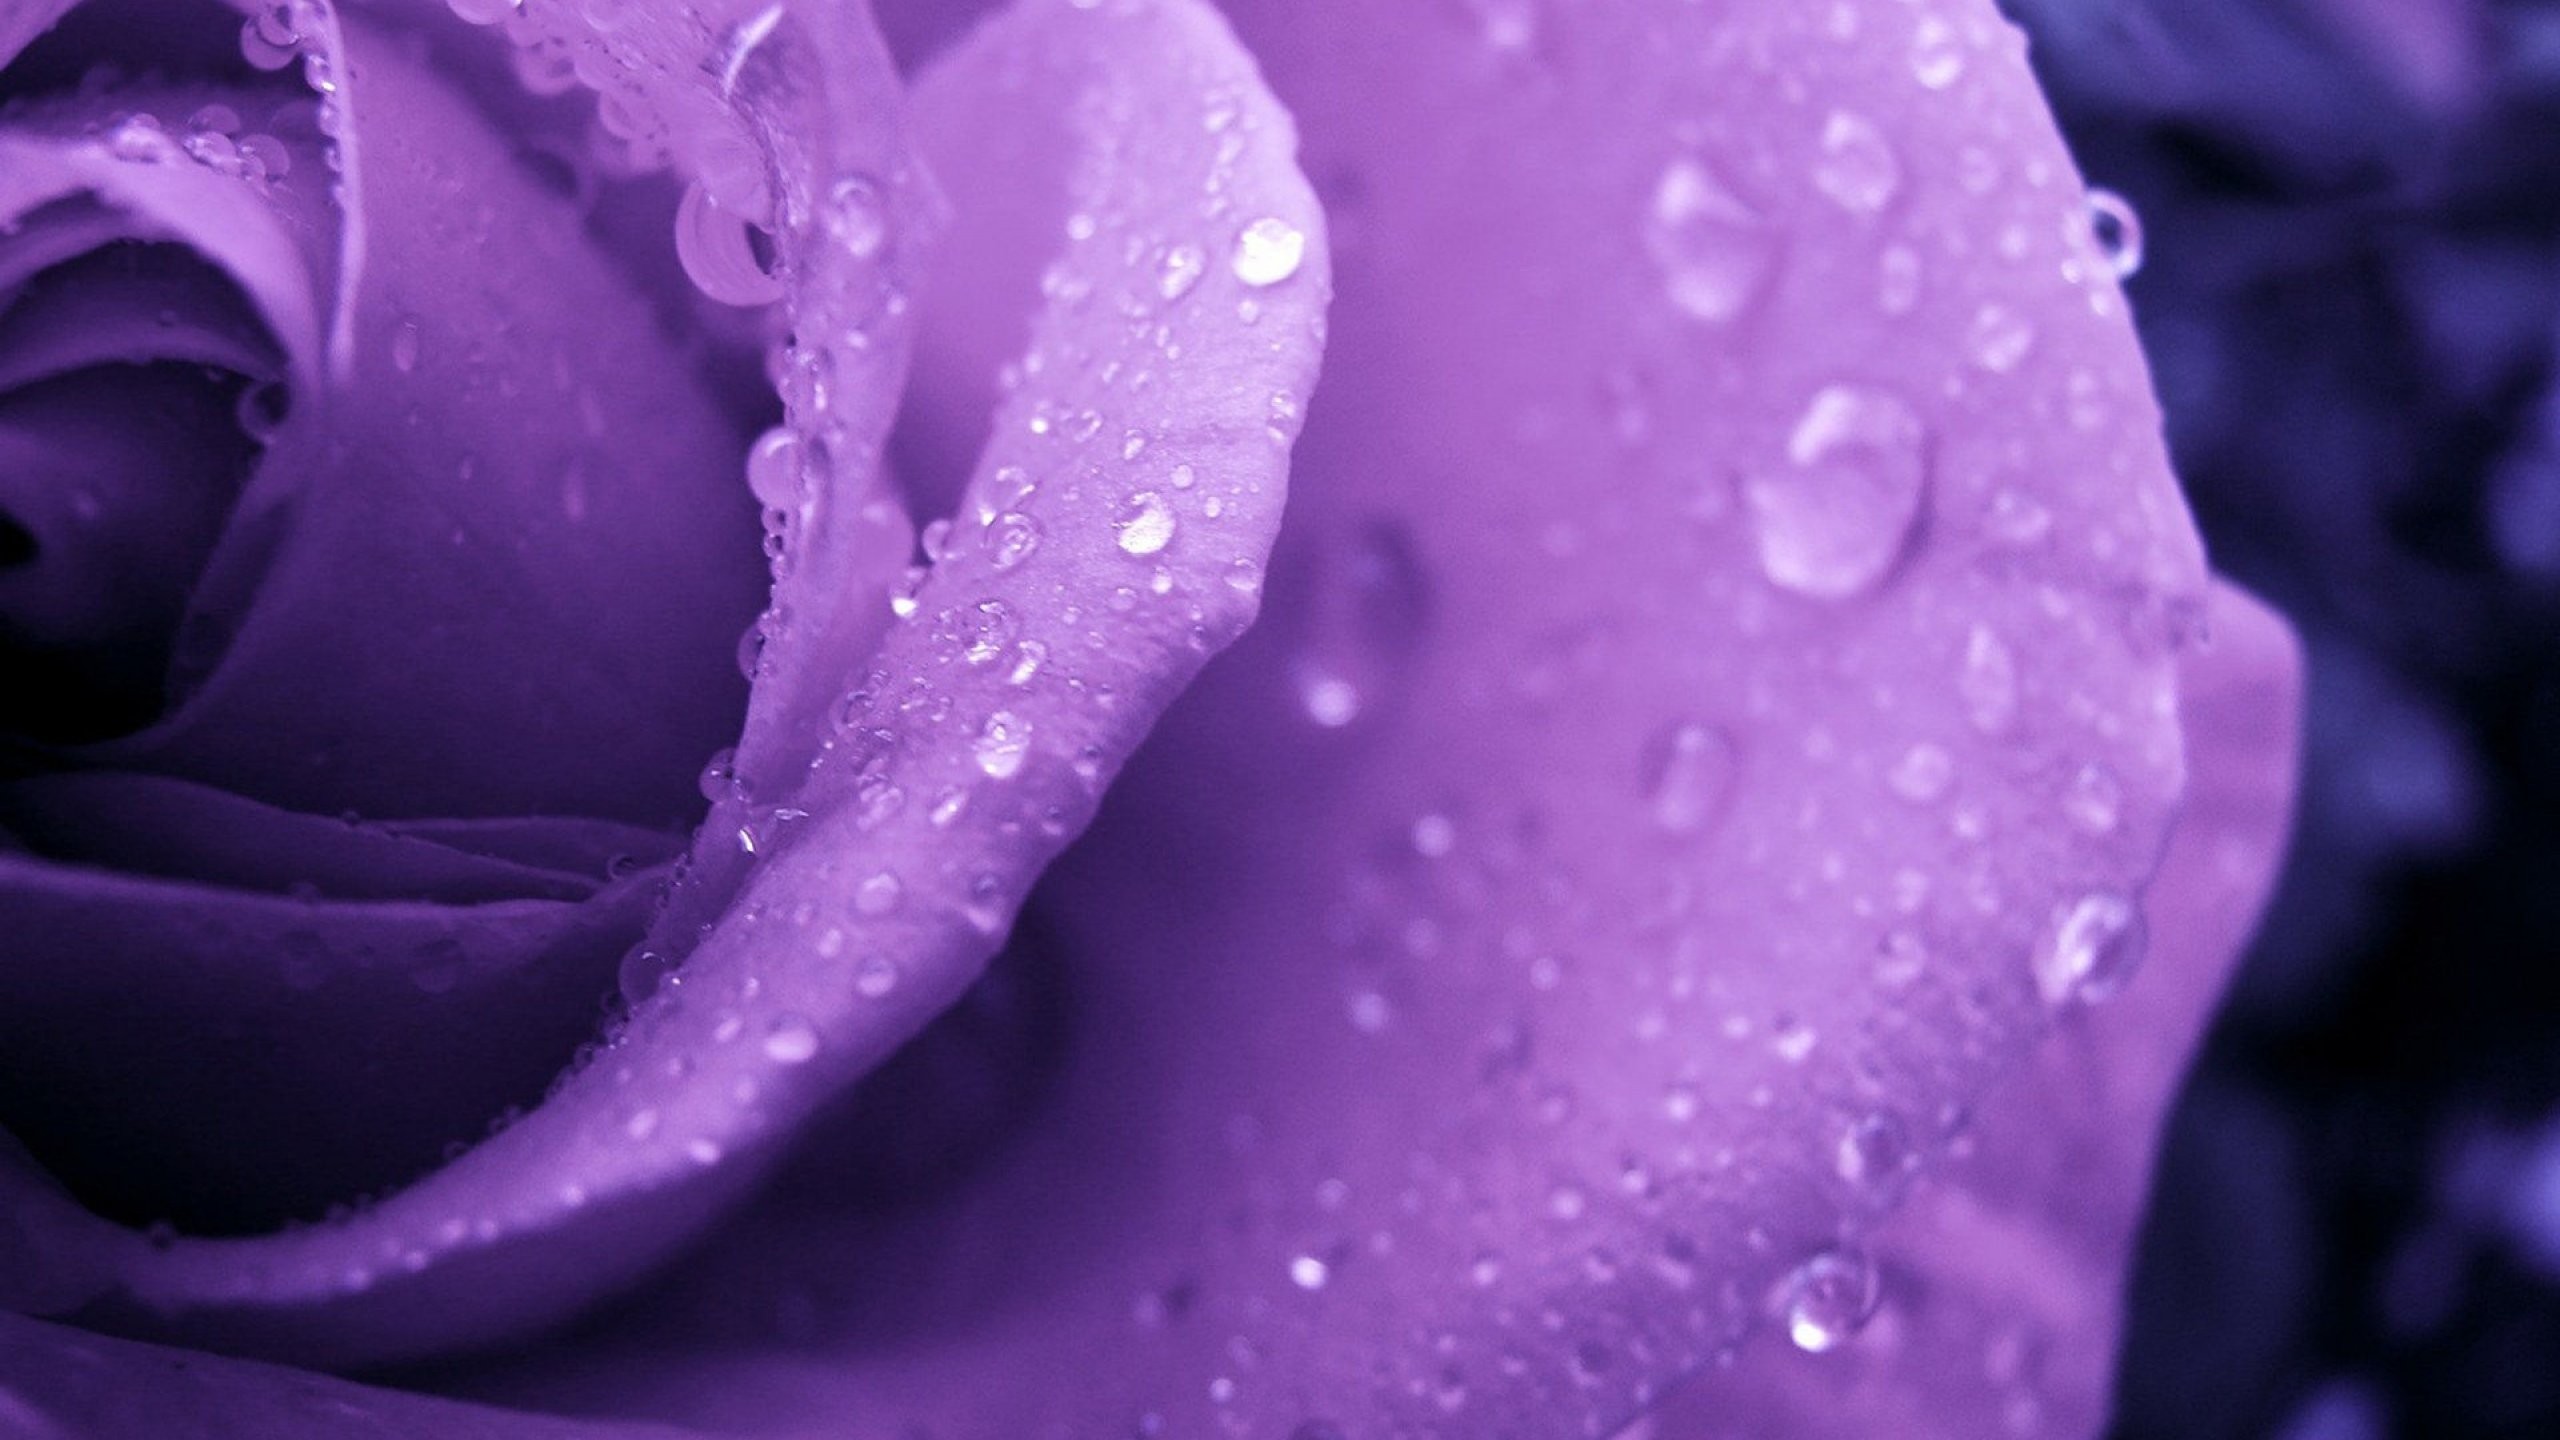 Hd Flowers Wallpapers, Nature, Amazing, Flowers, Picture, - Purple Flower With Water Drops - HD Wallpaper 